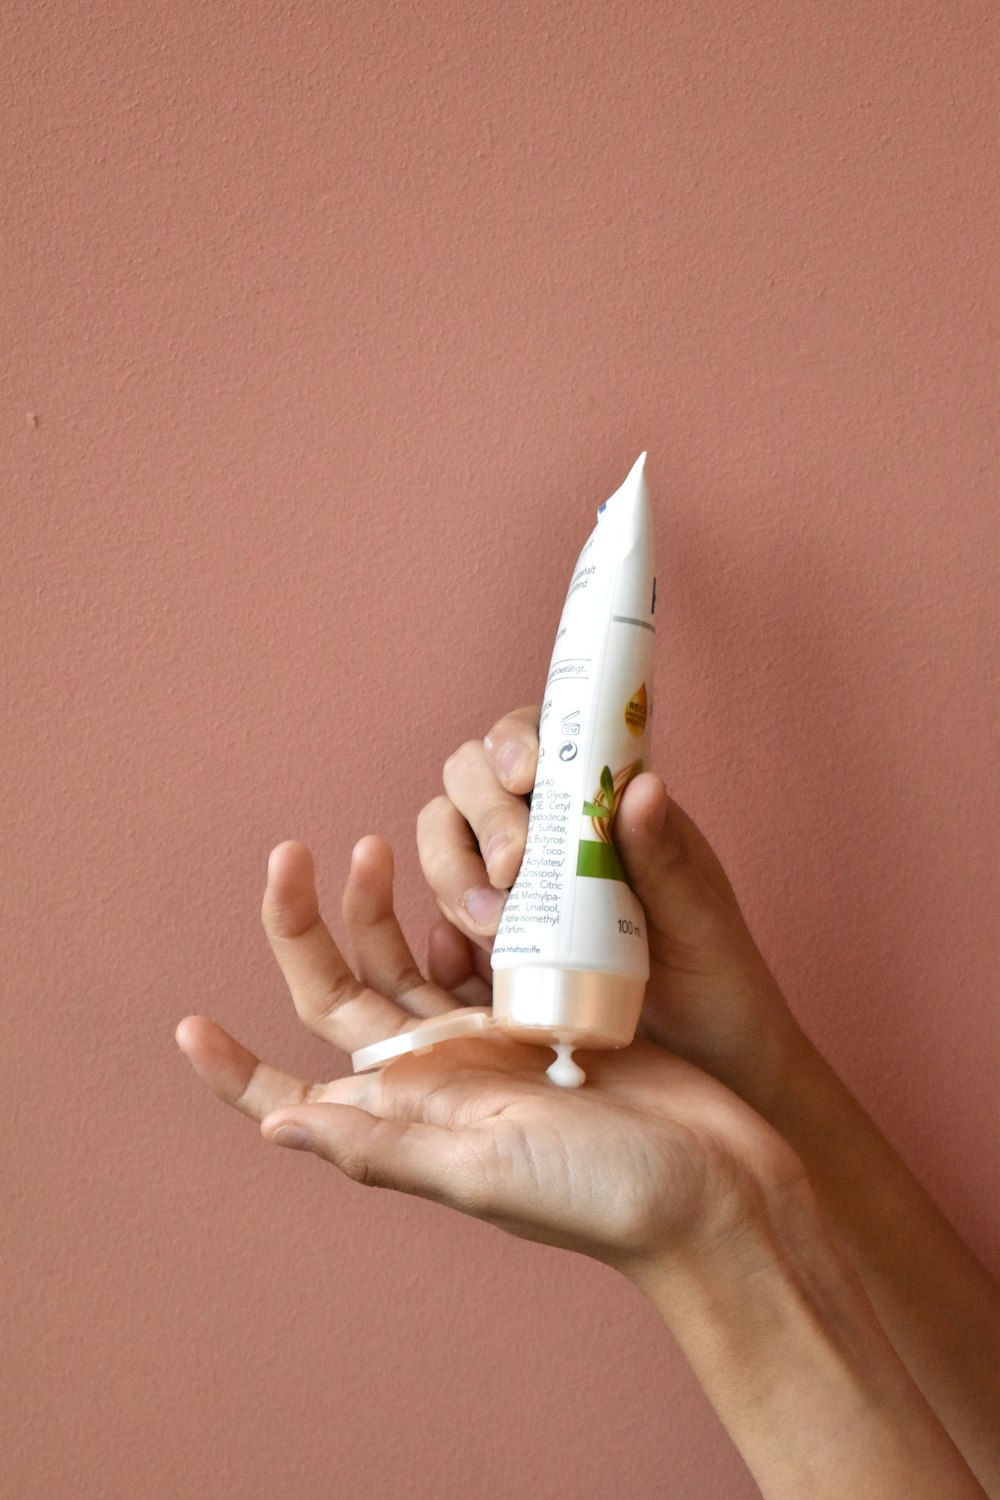 a person holding a tube of toothpaste in their hand